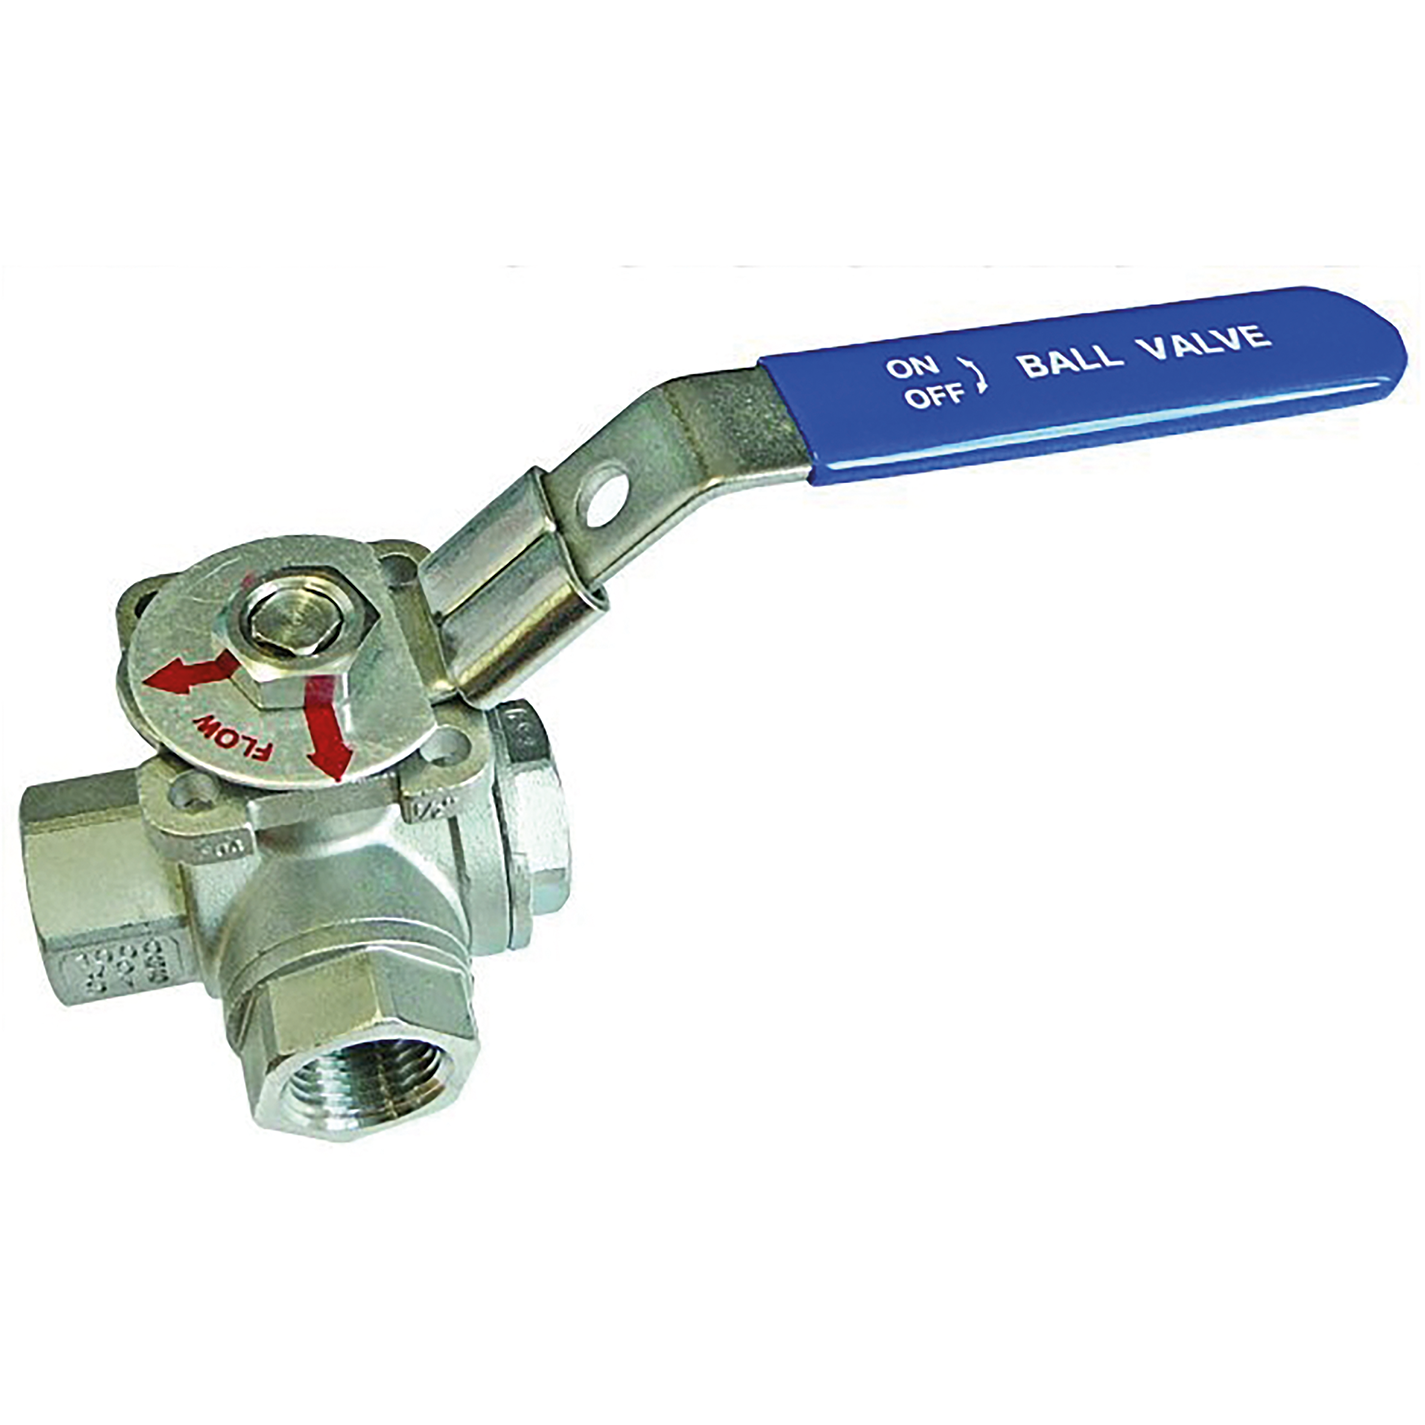 2" BSPP Female 3-Way L Ported Ball Valve